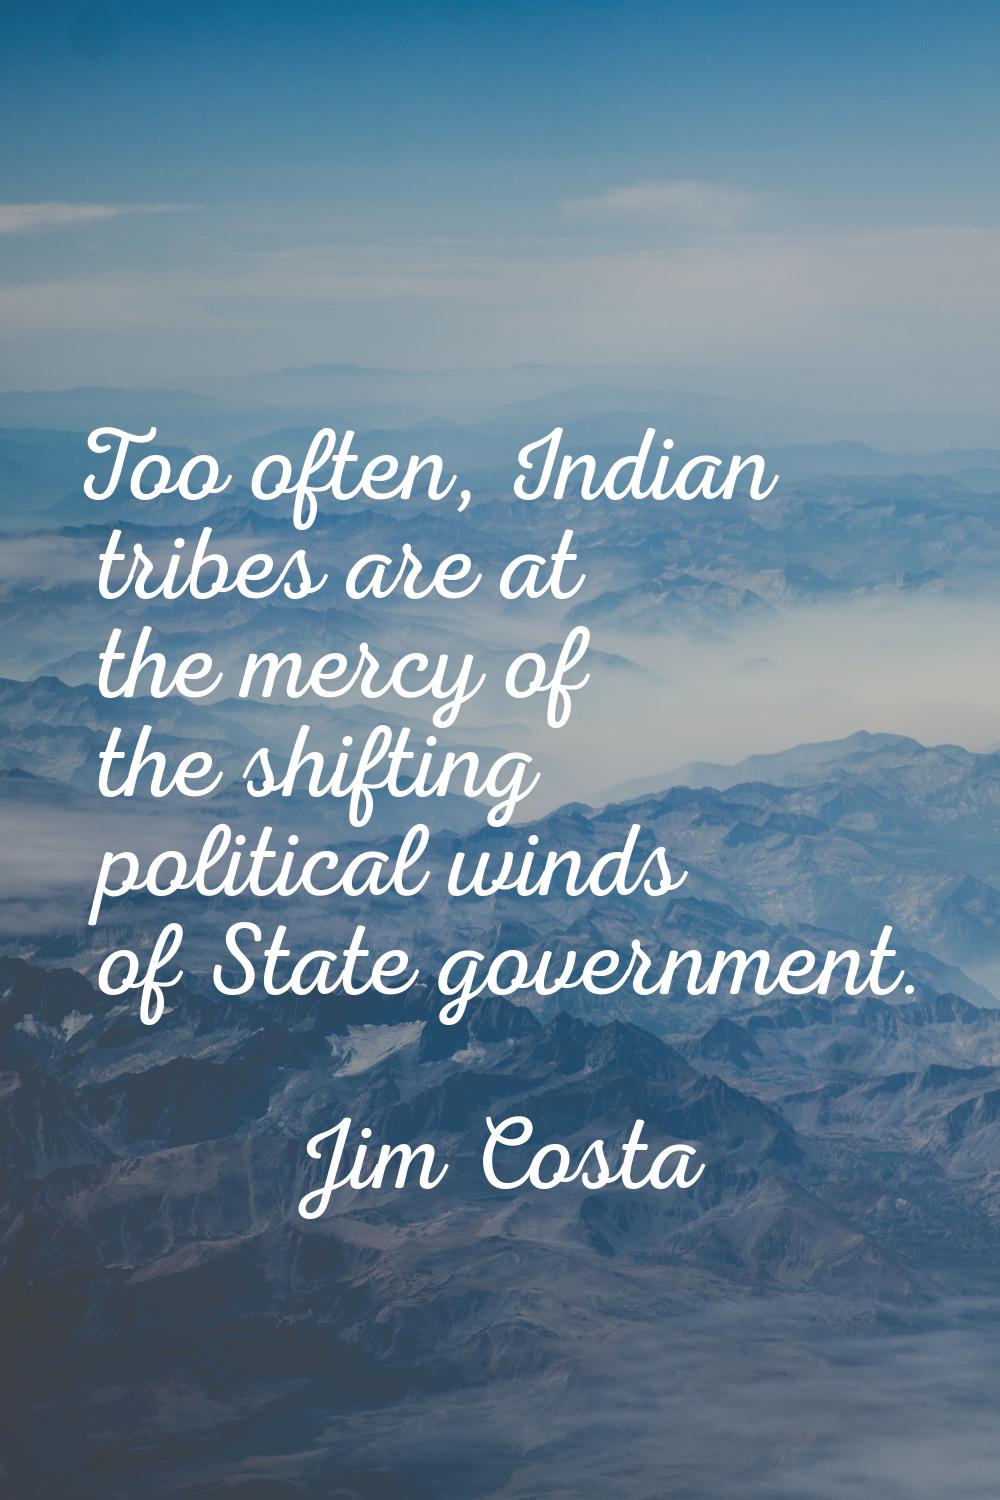 Too often, Indian tribes are at the mercy of the shifting political winds of State government.